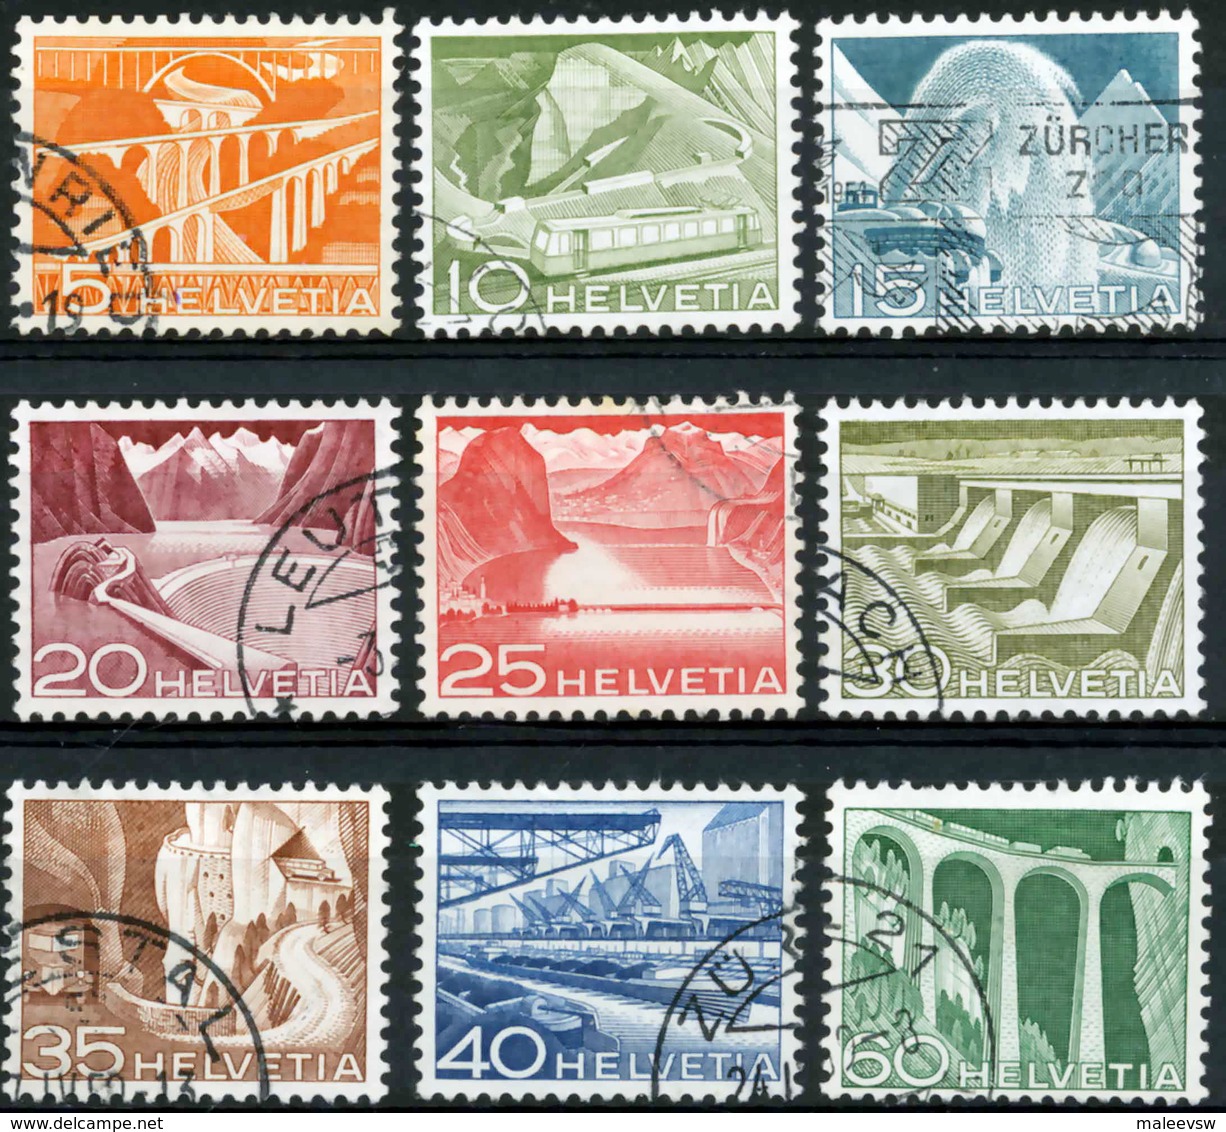 Switzerland Has Many Interesting Postage Stamps - Vrac (max 999 Timbres)